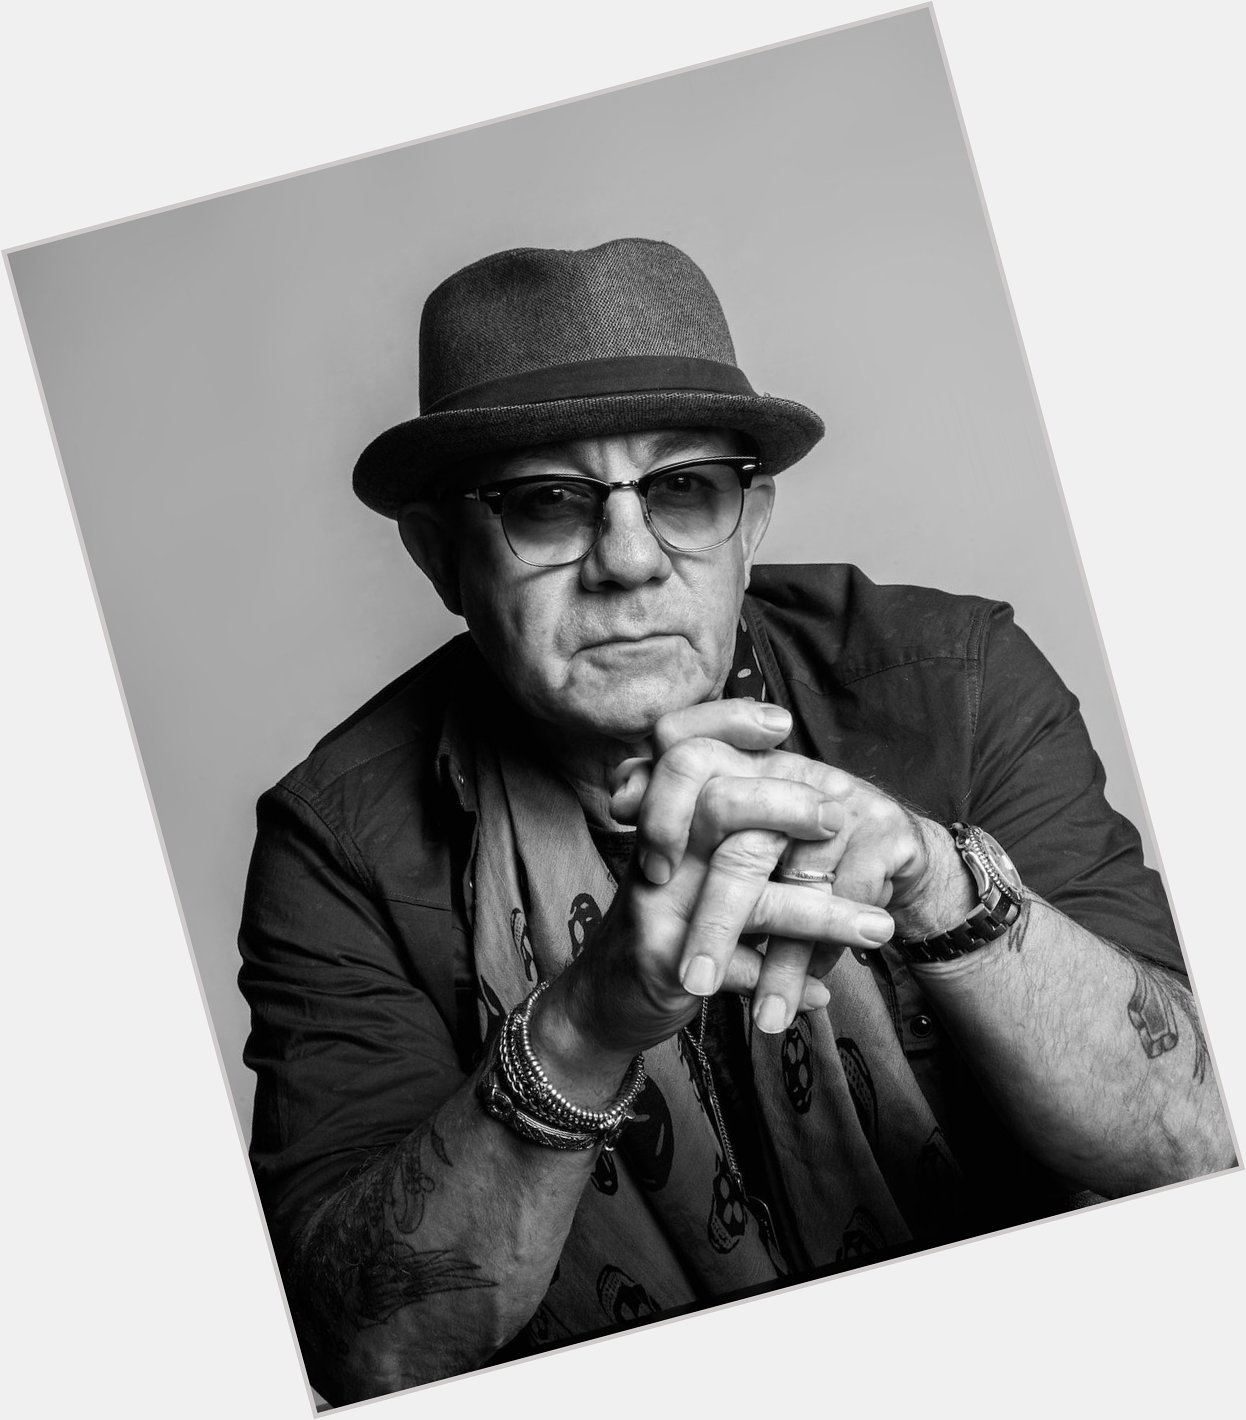 Happy Birthday Bernie Taupin!  Born on this day in 1950. 